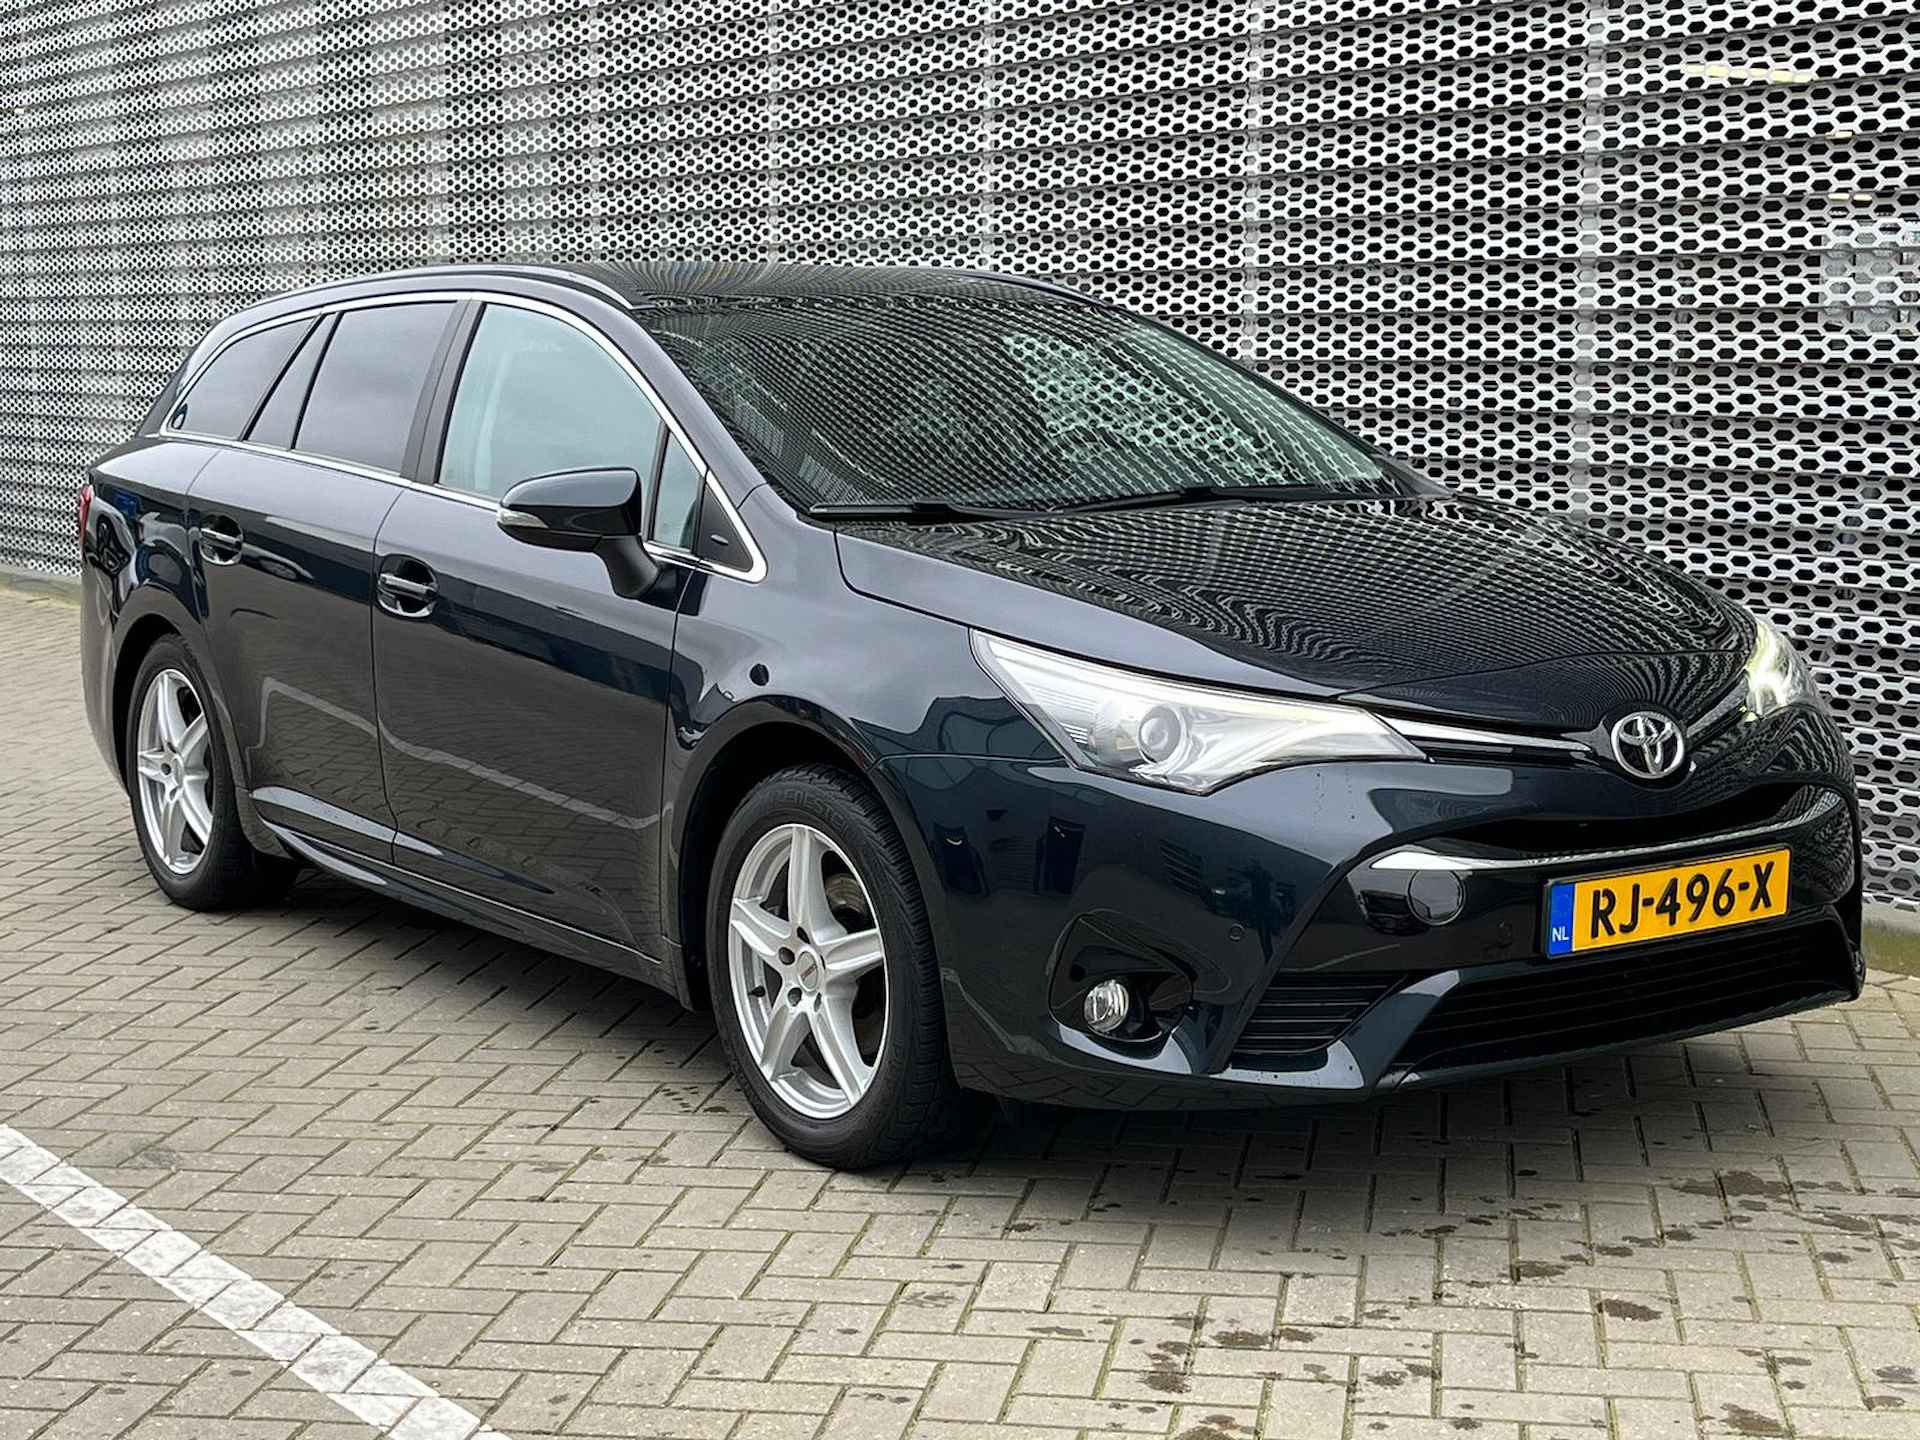 Toyota Avensis Touring Sports 1.8 VVT-i SkyView Edition - 10/28